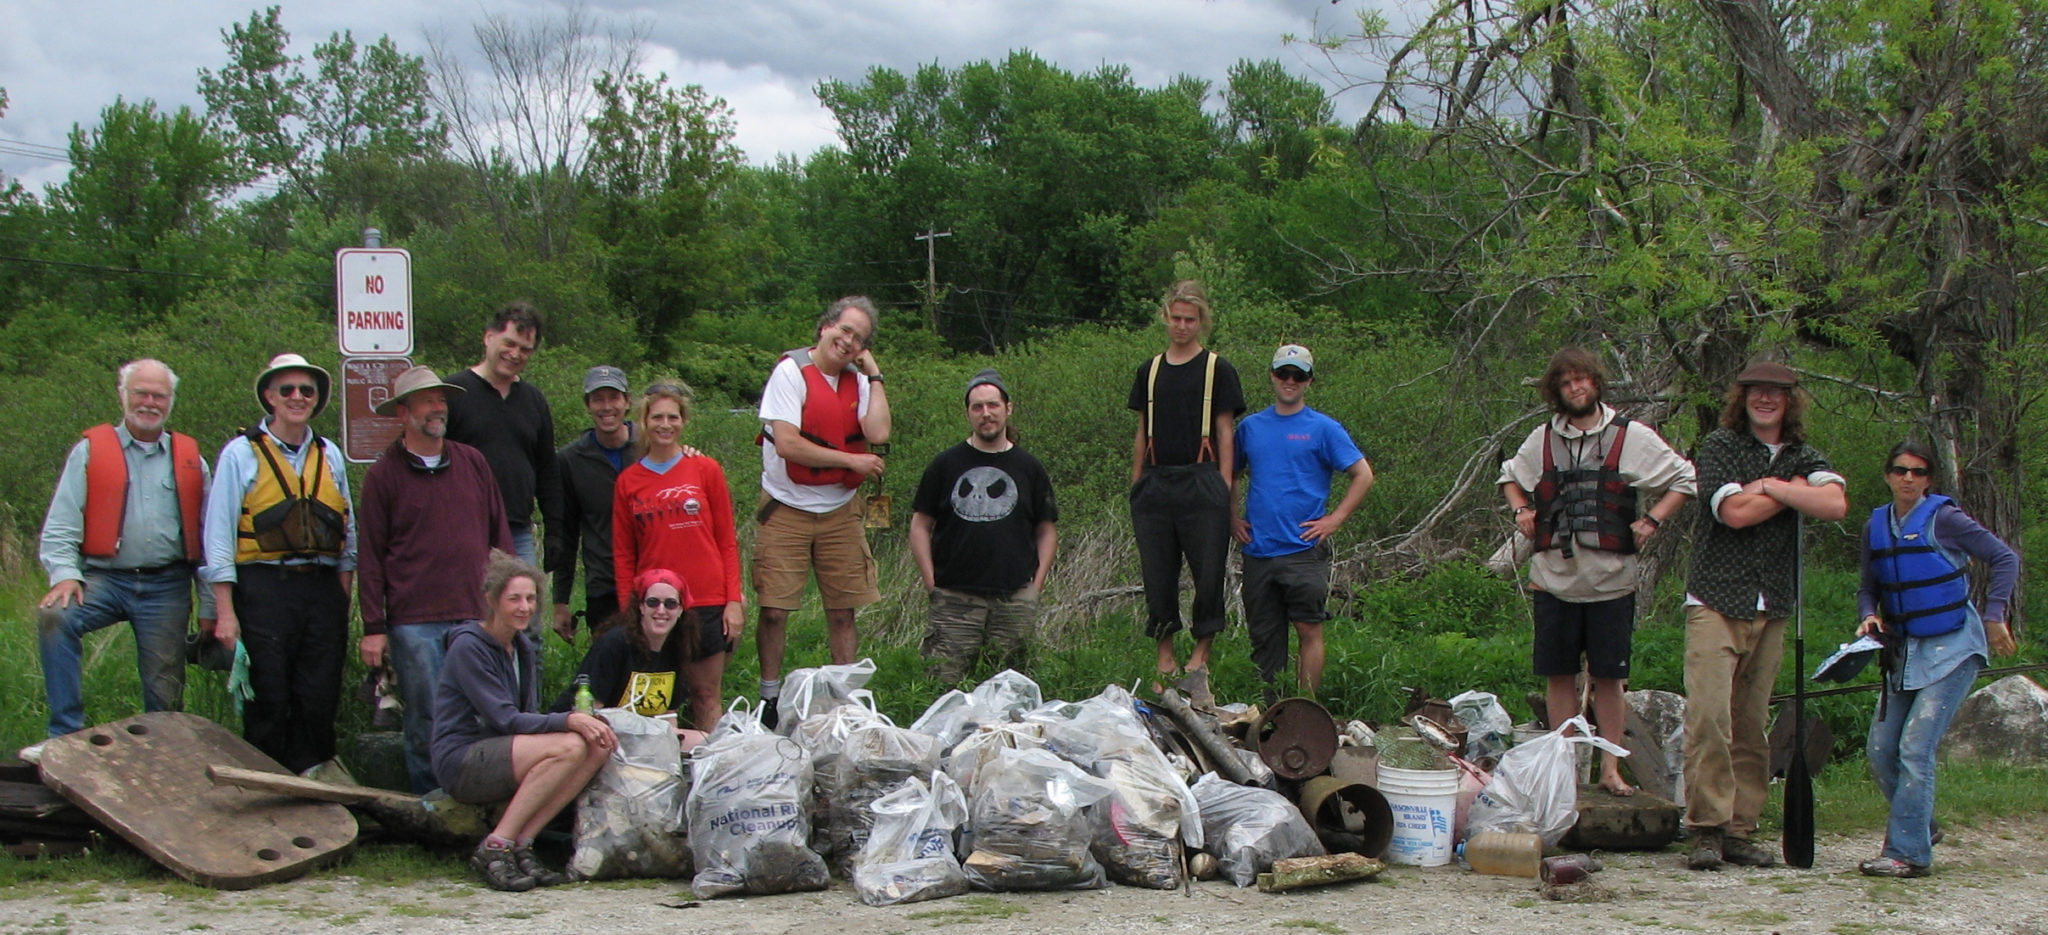 Thank You To All The Volunteers Who Helped Cleanup The River!